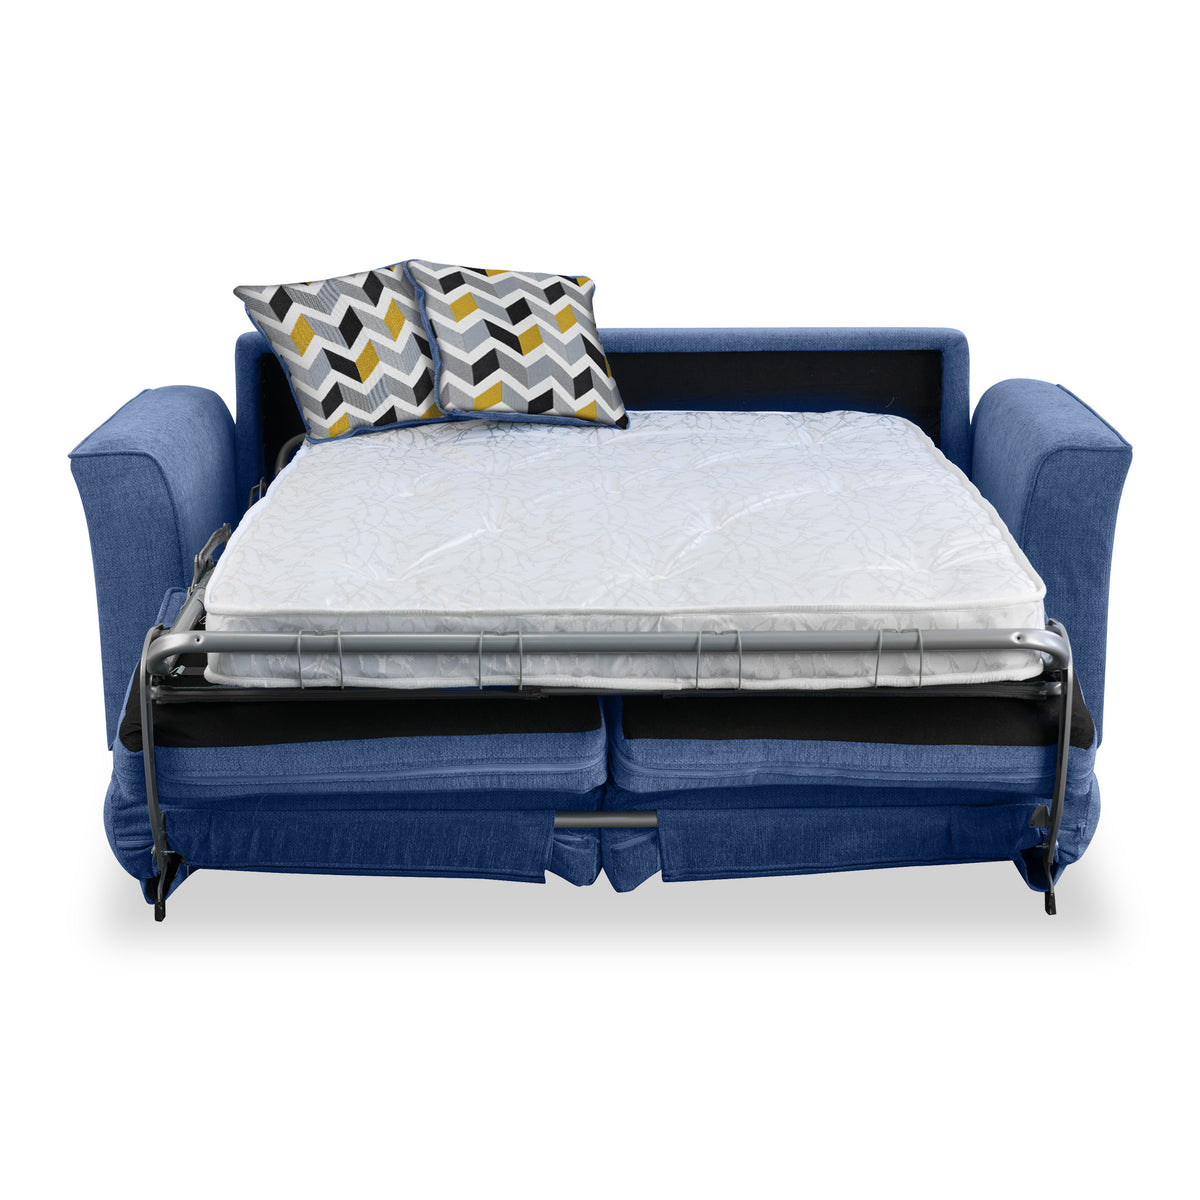 Abbott 2 Seater Sofabed in Denim with Morelisa Mustard Cushions by Roseland Furniture